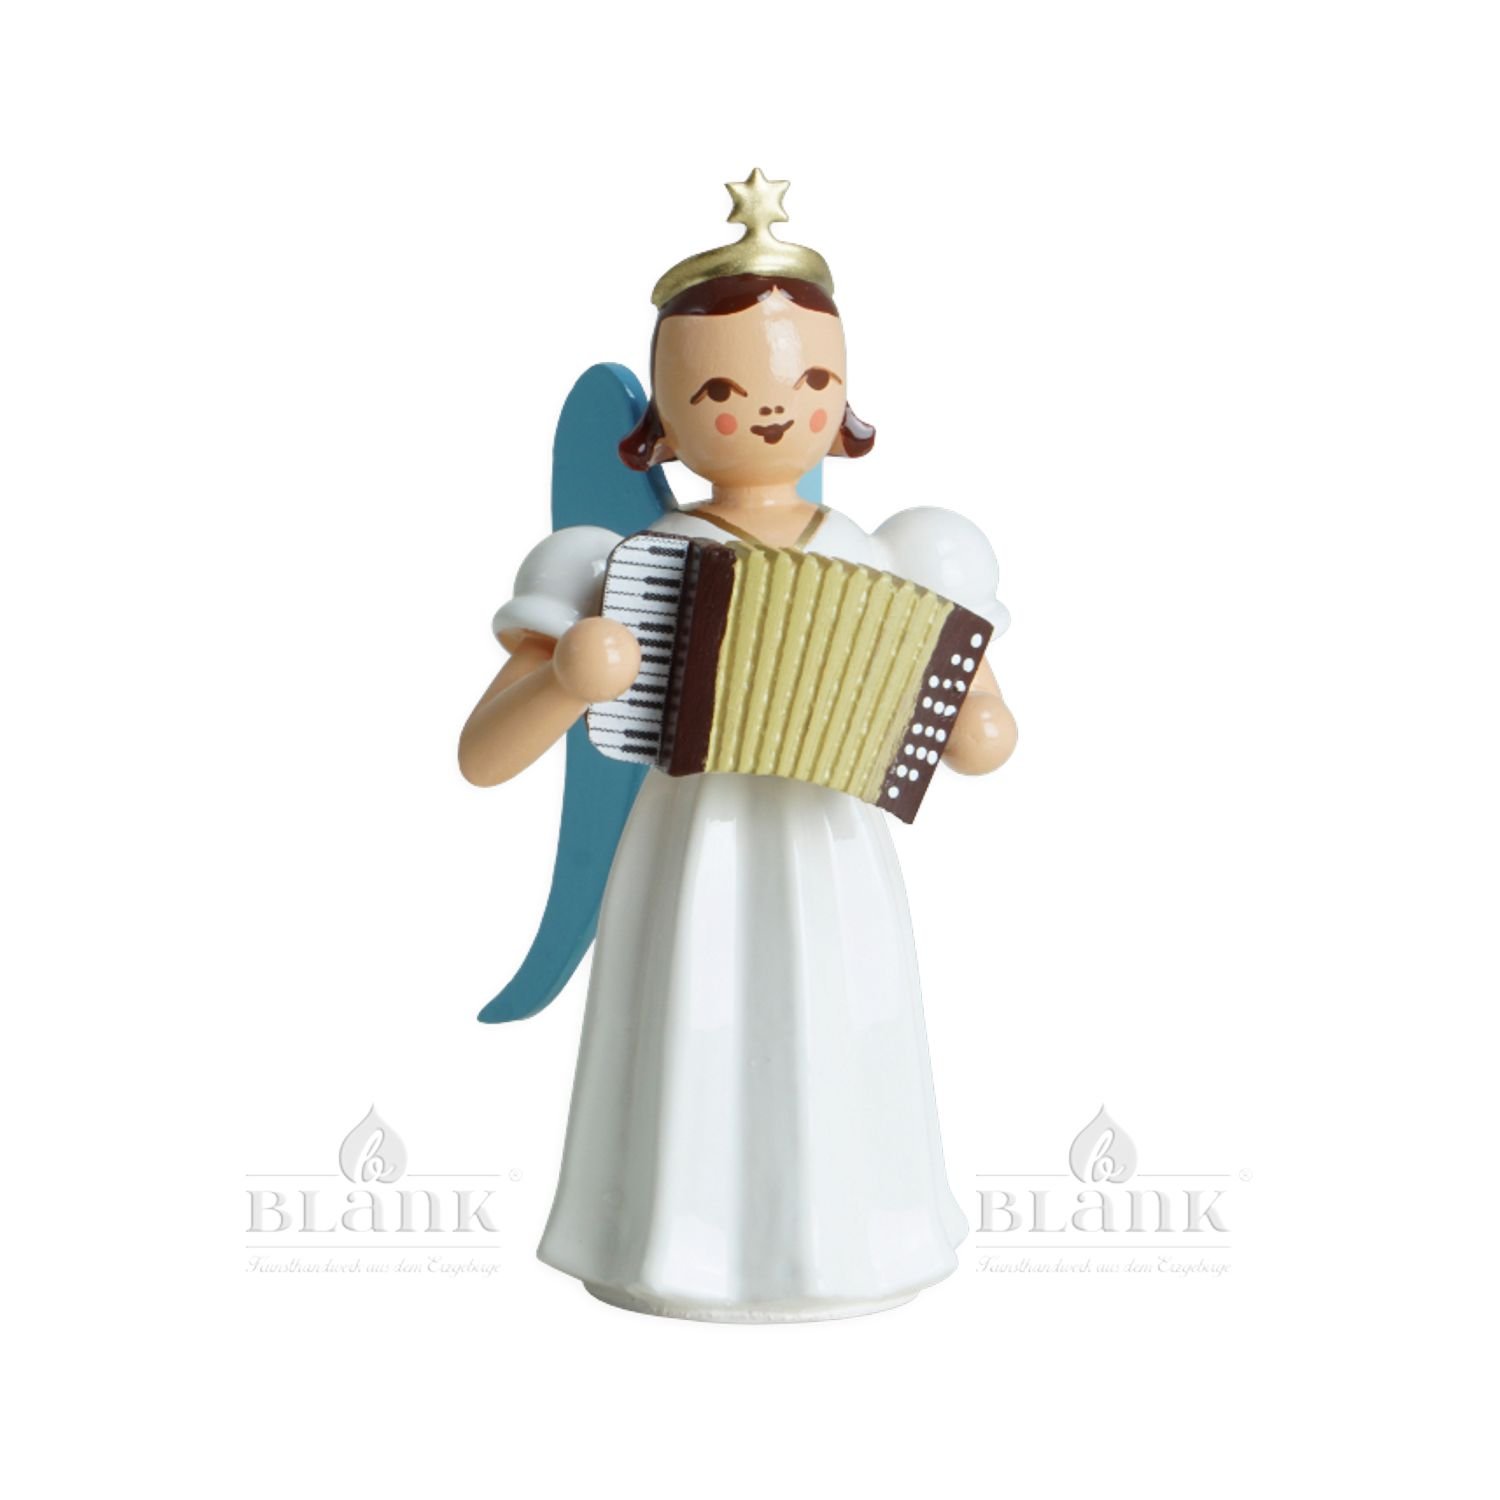 Blank long-robed angel with accordion, colored